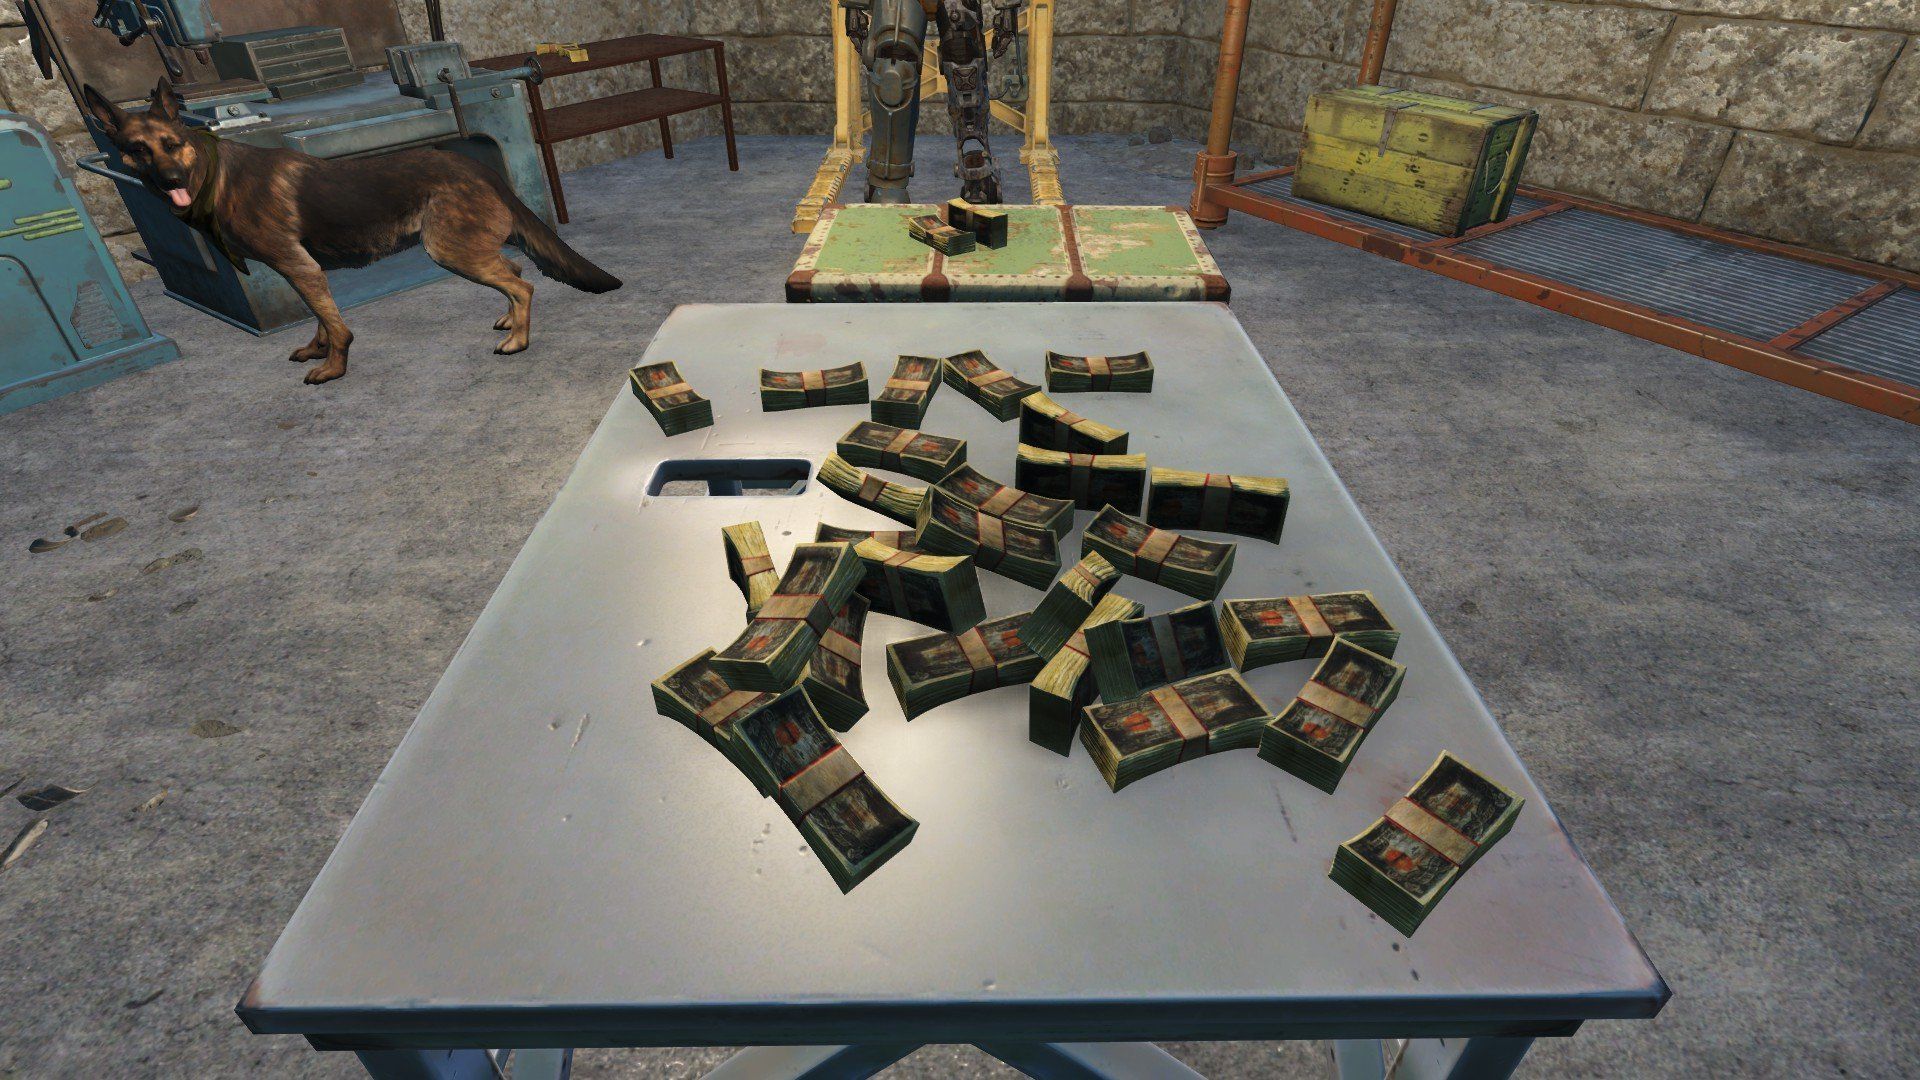 Cash on a table in Fallout 4